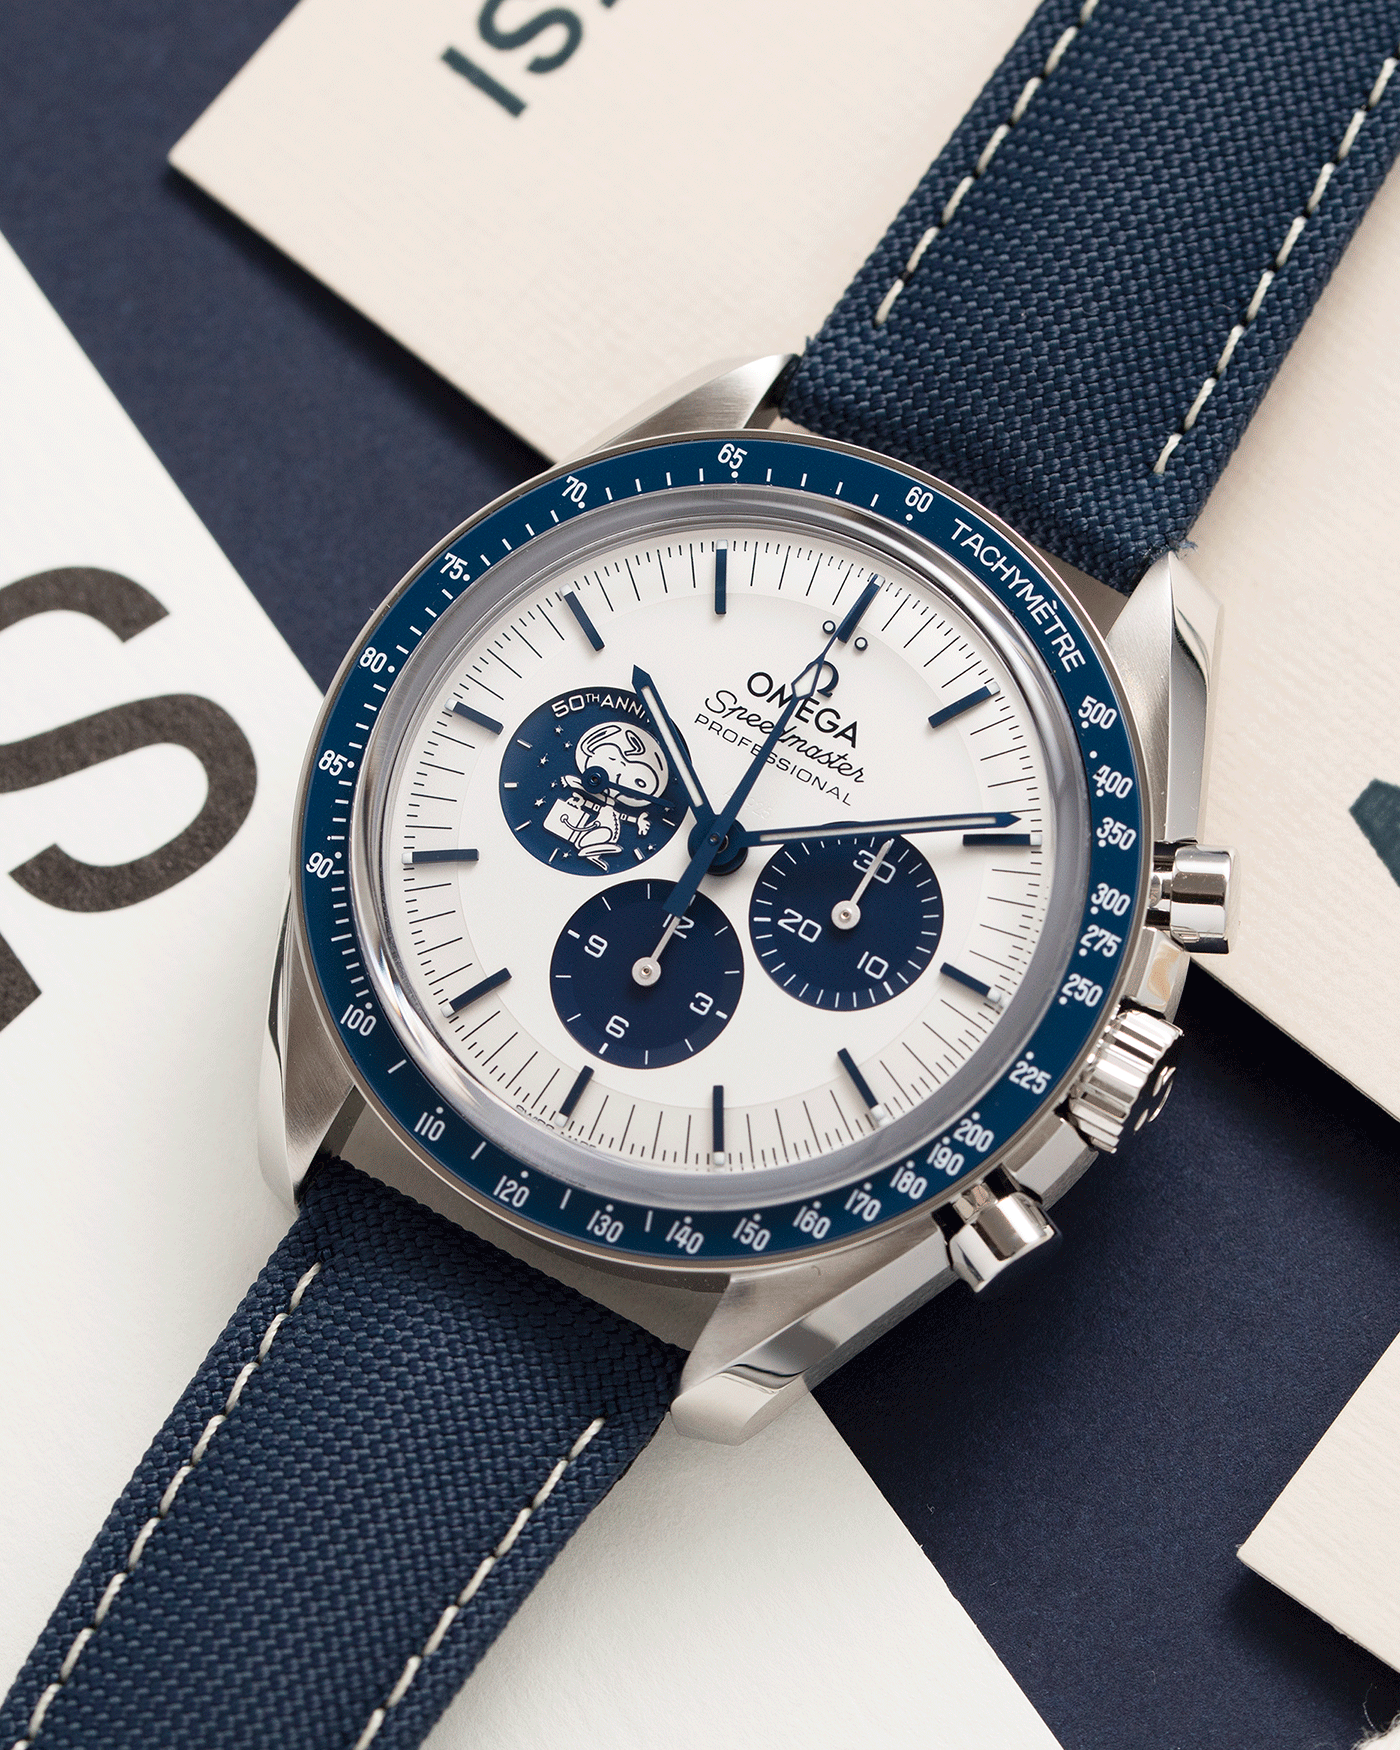 Brand: Omega Year: 2021 Model: Speedmaster Silver Snoopy Award 50th Anniversary Reference Number: 310.32.42.50.02.001 Material: Stainless Steel Movement: Omega in-house Cal. 3861 Case Diameter: 42mm Bracelet/Strap: Omega Blue Coated Nylon Fabric Strap with Omega Stainless Steel Tang Buckle